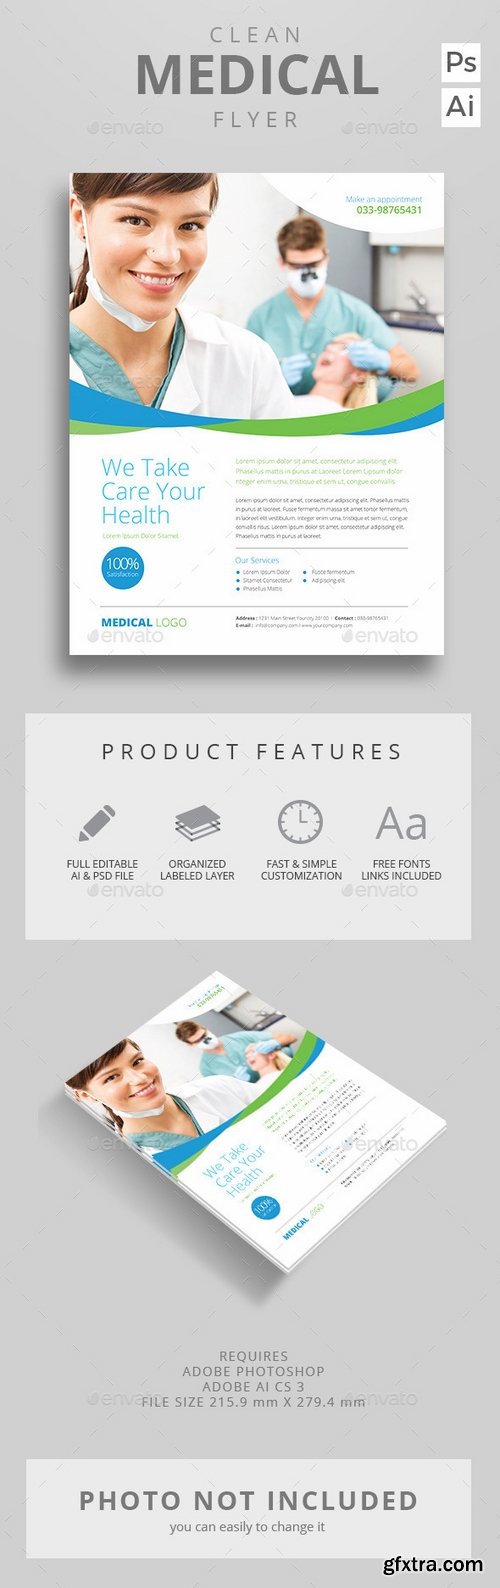 GraphicRiver - Clean Medical Flyer 12991906